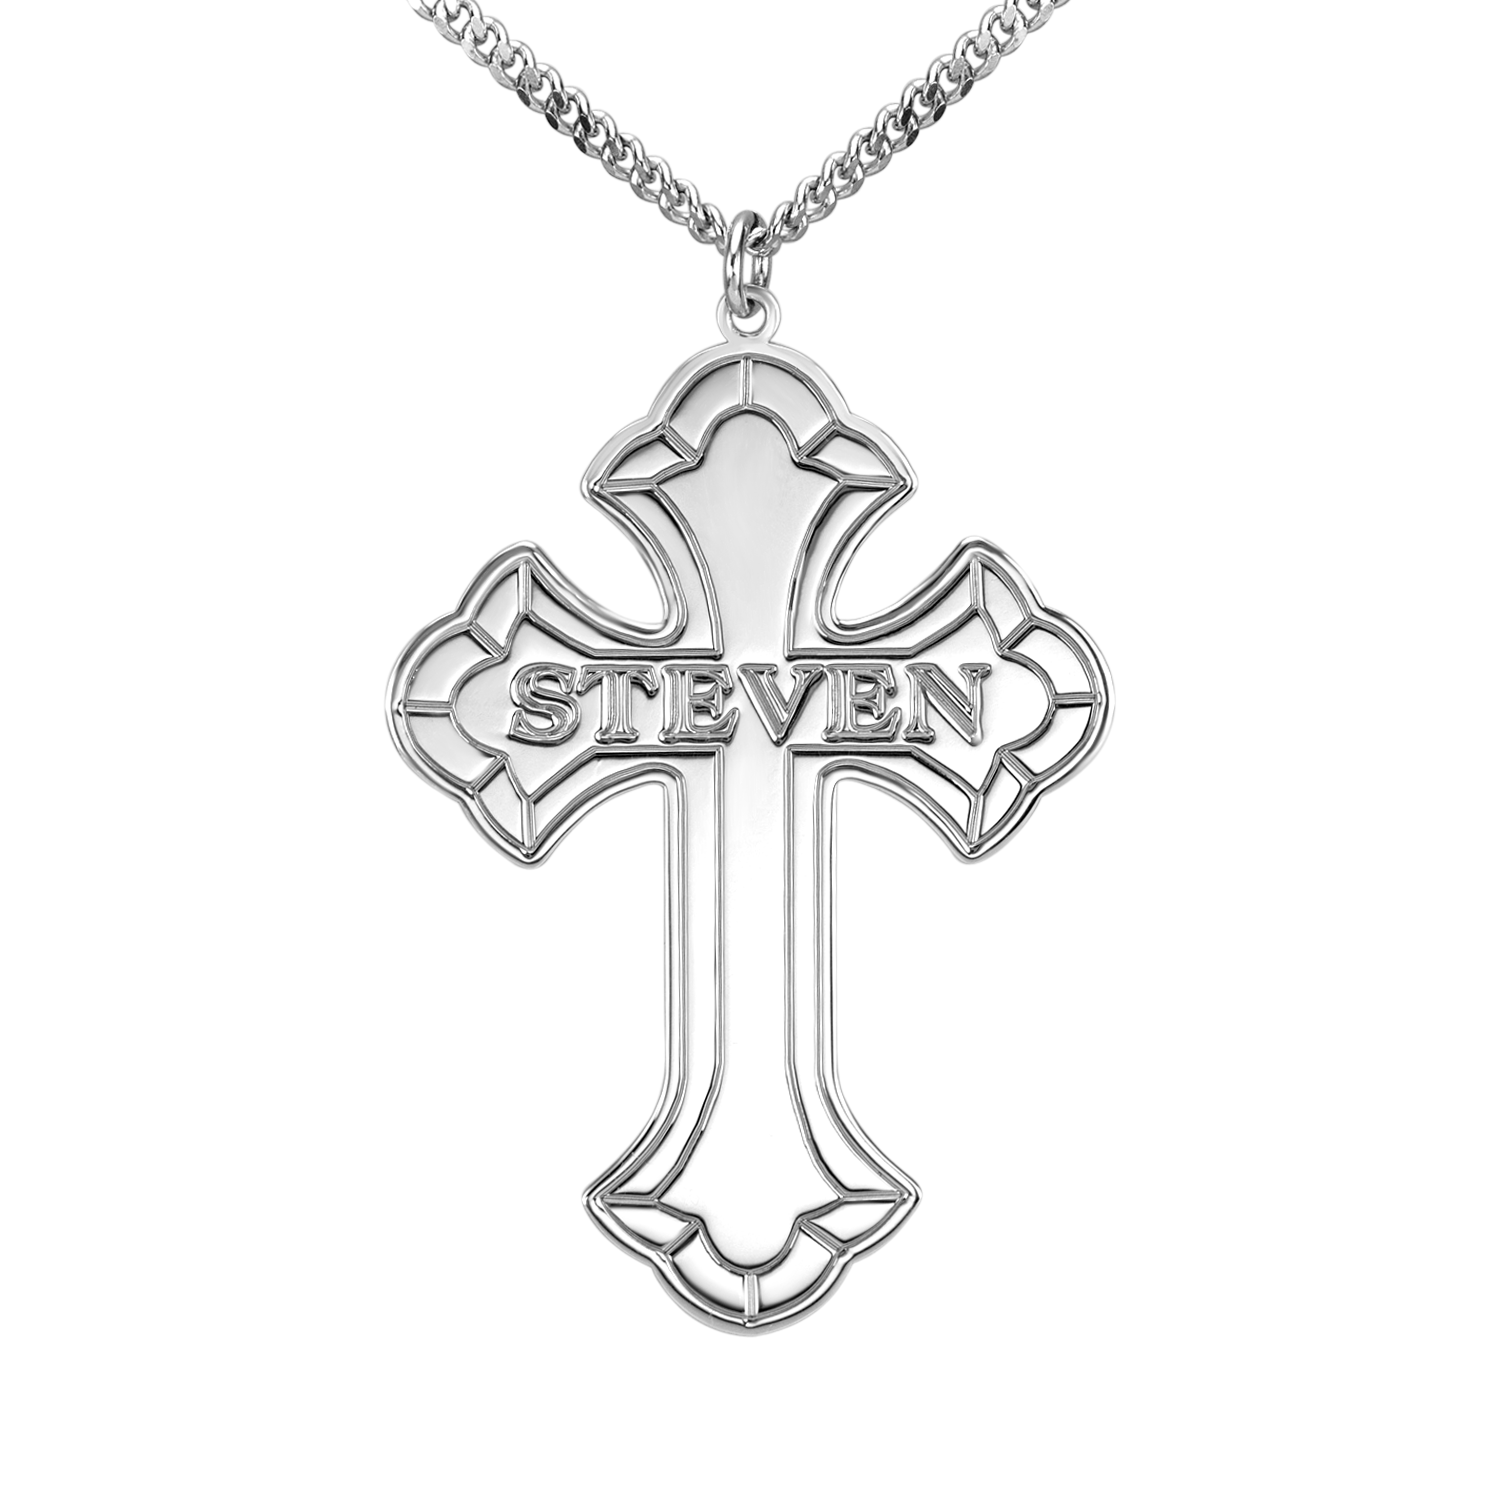 Personalized Large Engraved Cross Necklace Alternate 1